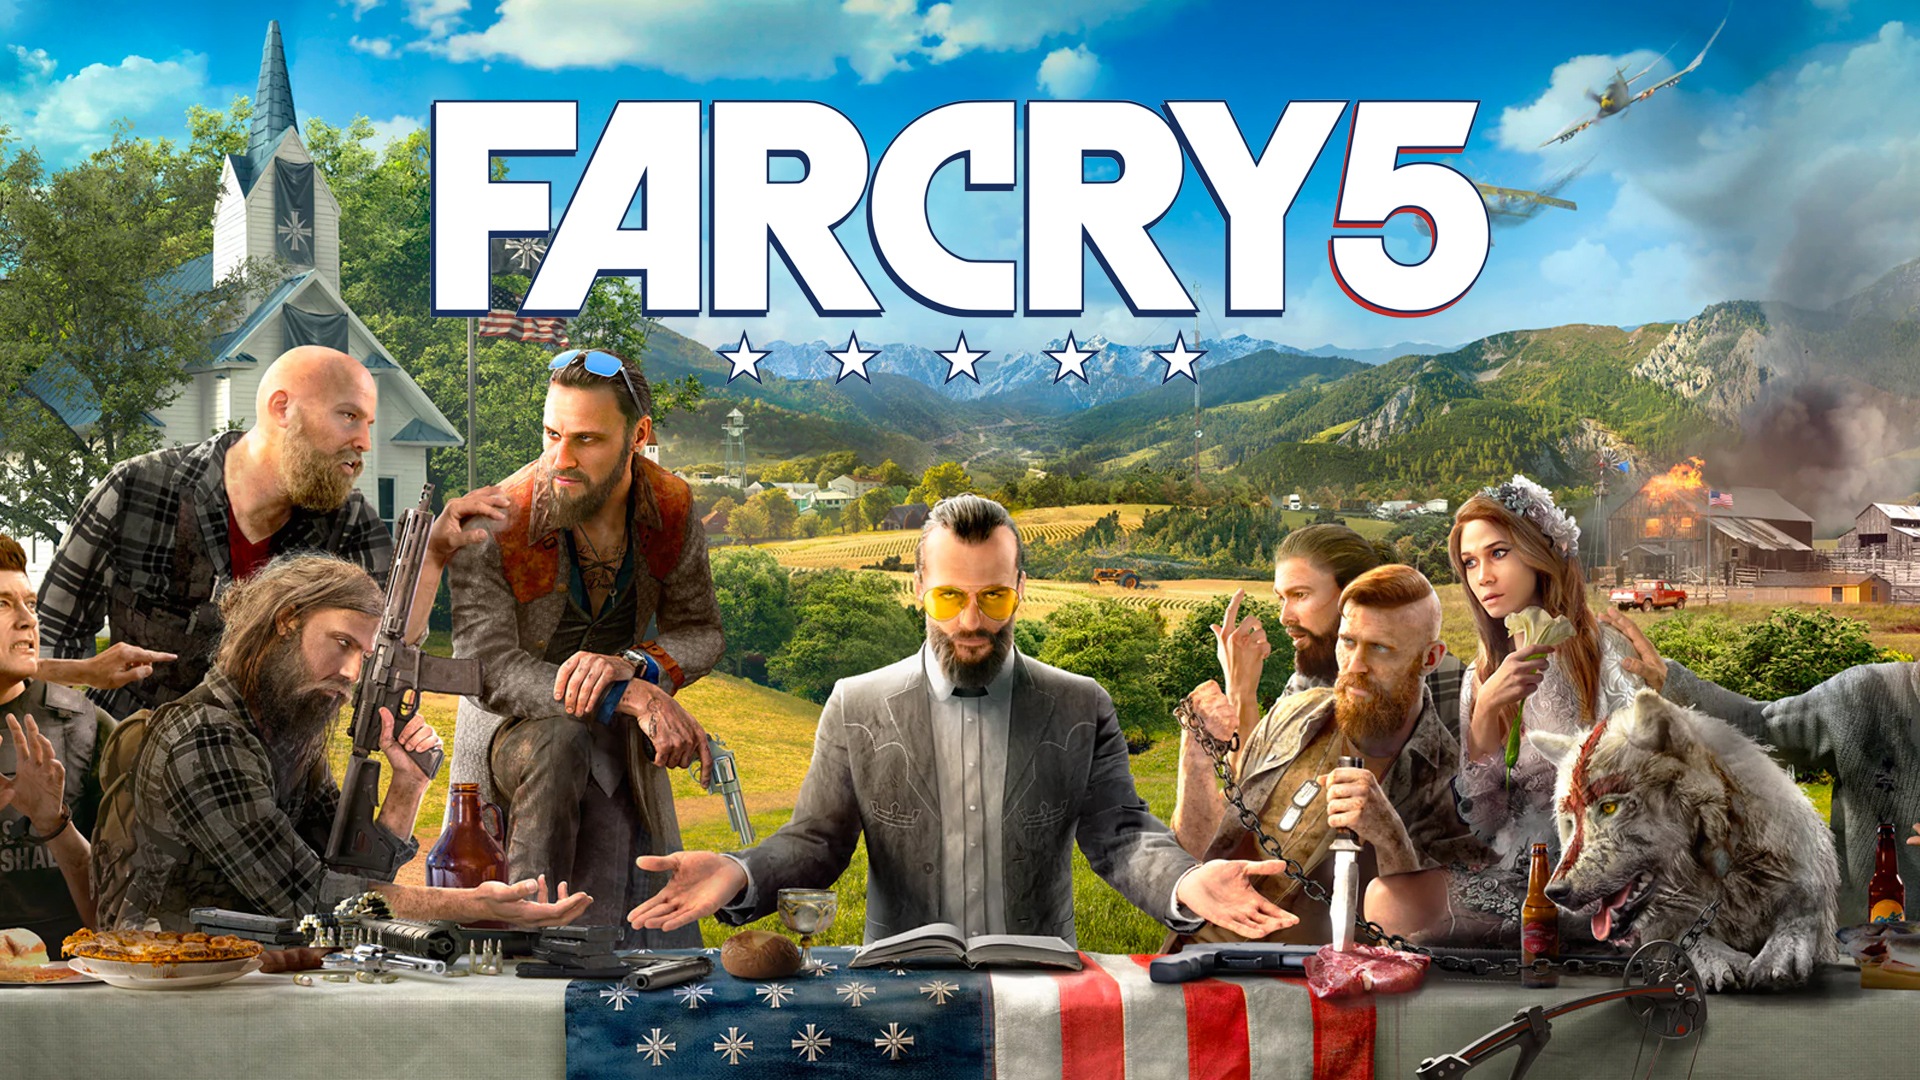 video gameplay let's play playthrough Far Cry 5 Arcade